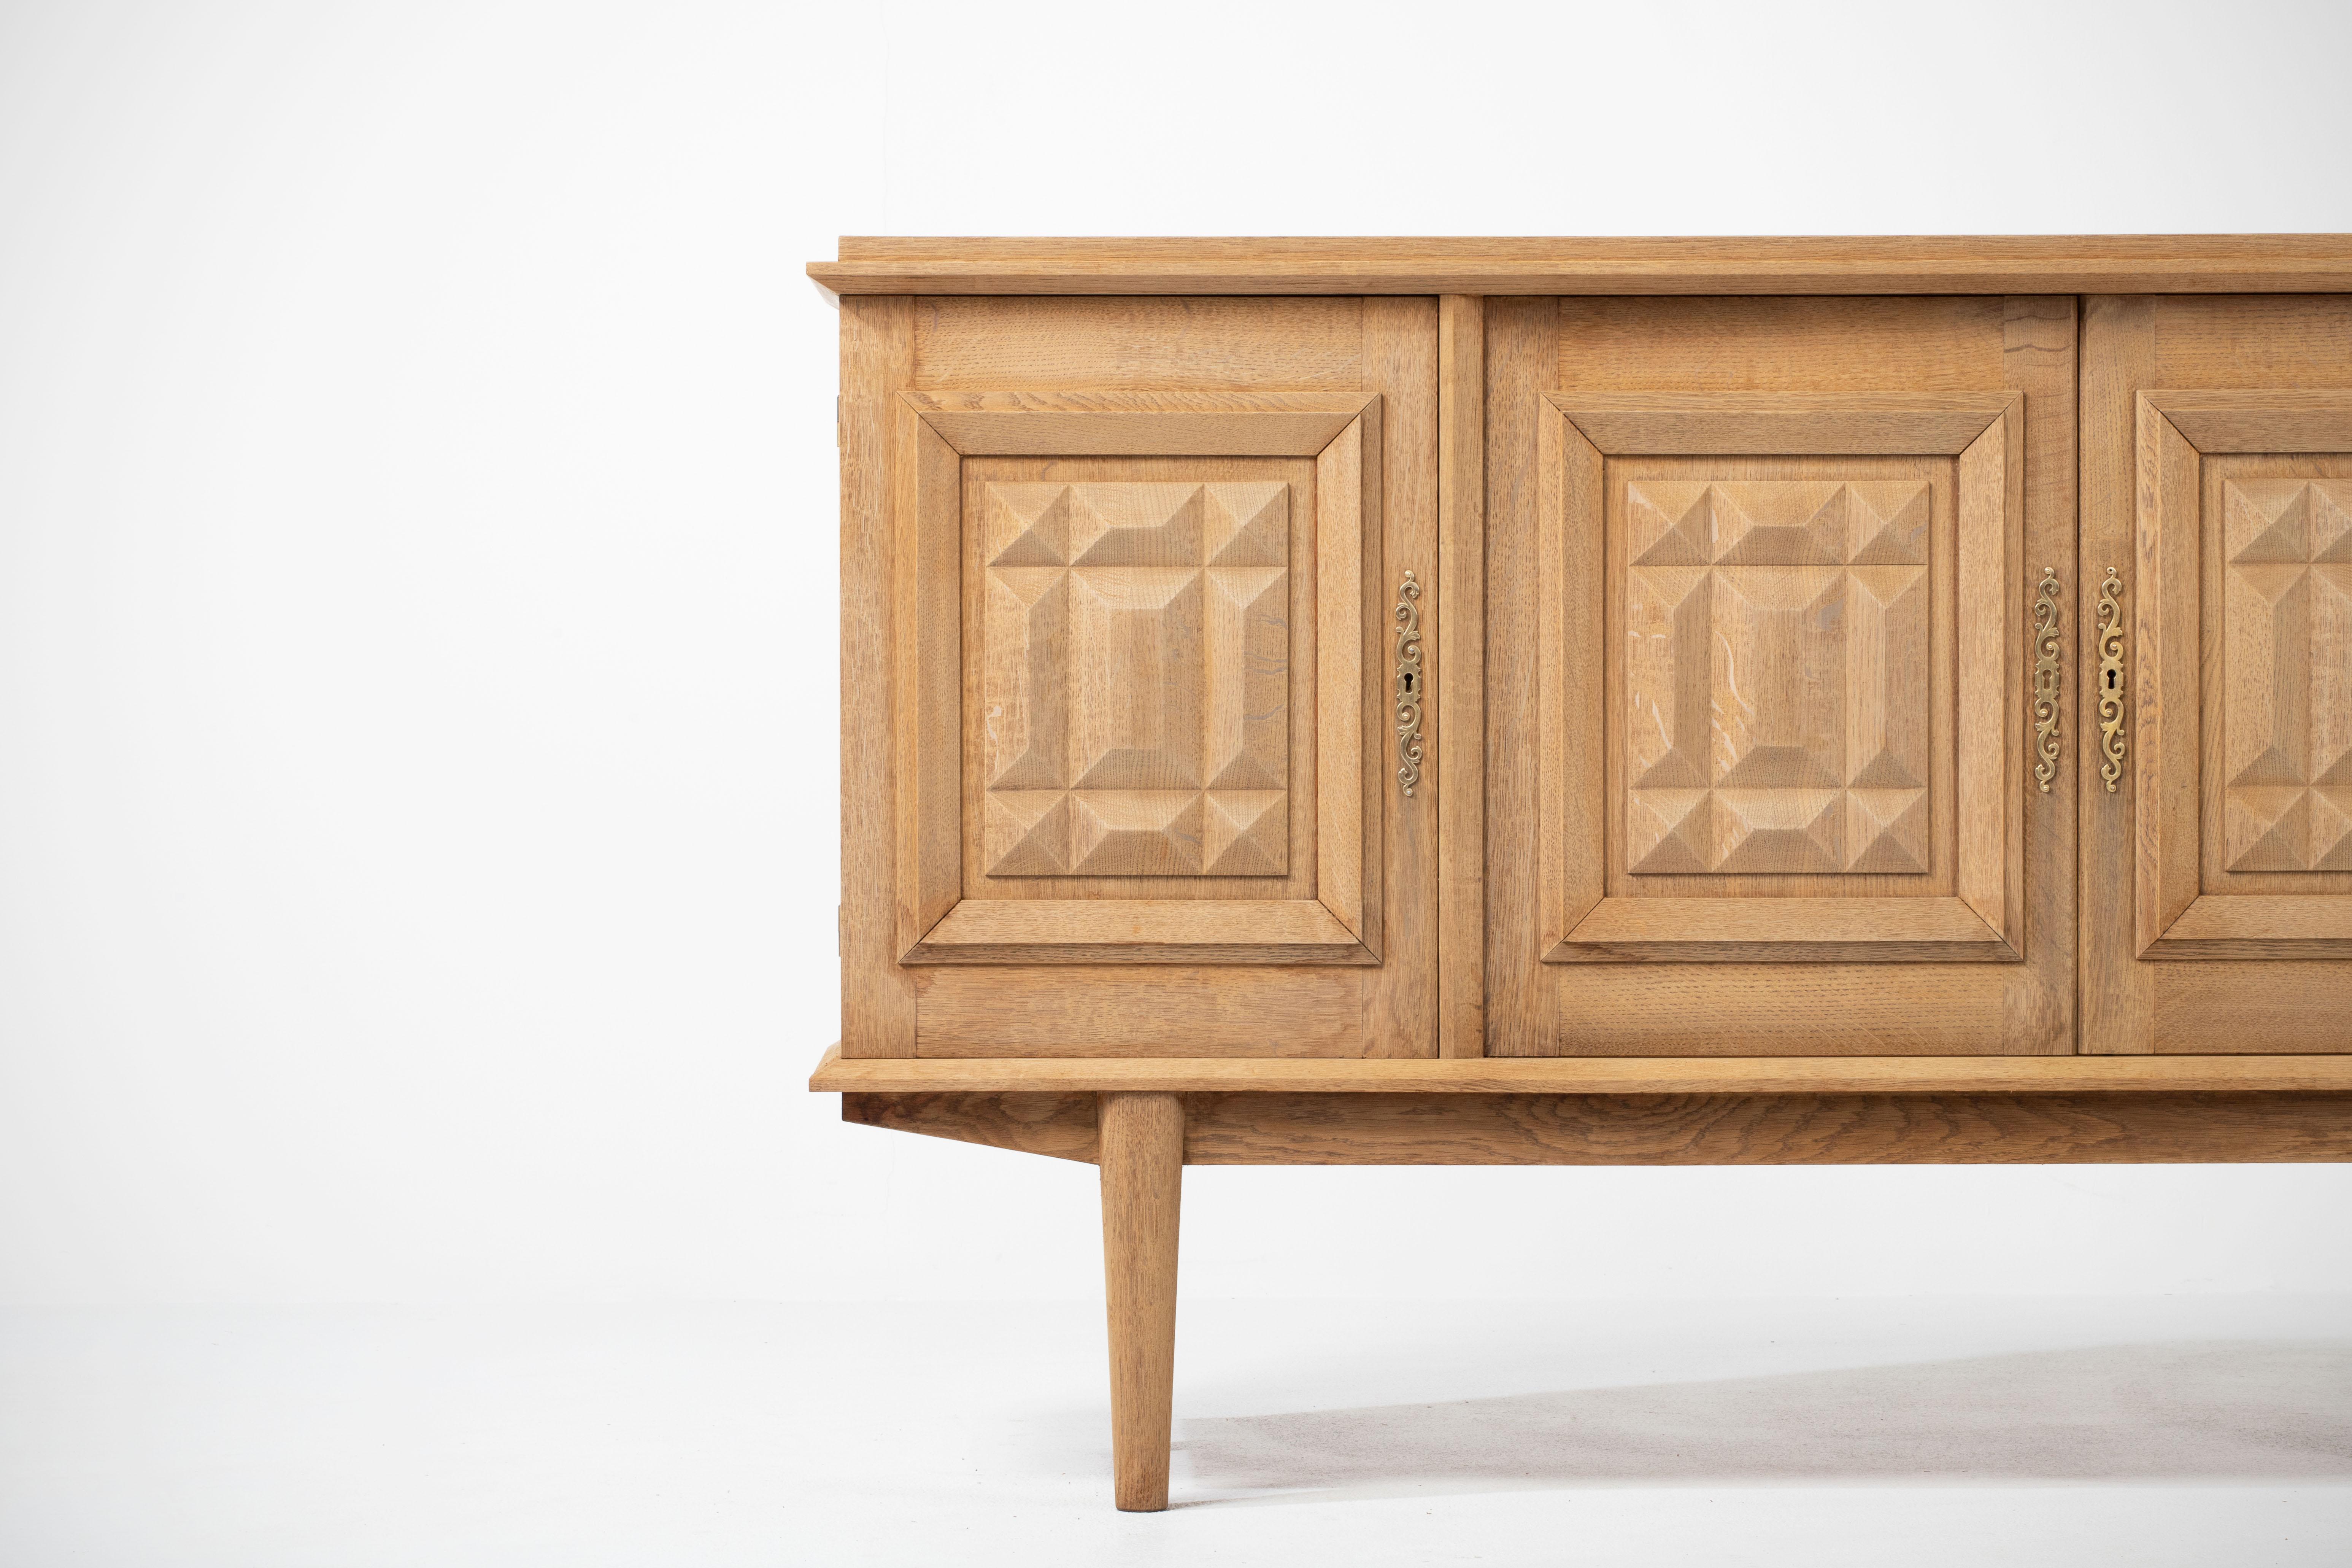 Bleached Solid Oak Credenza with Graphic Details, France, 1940s For Sale 1